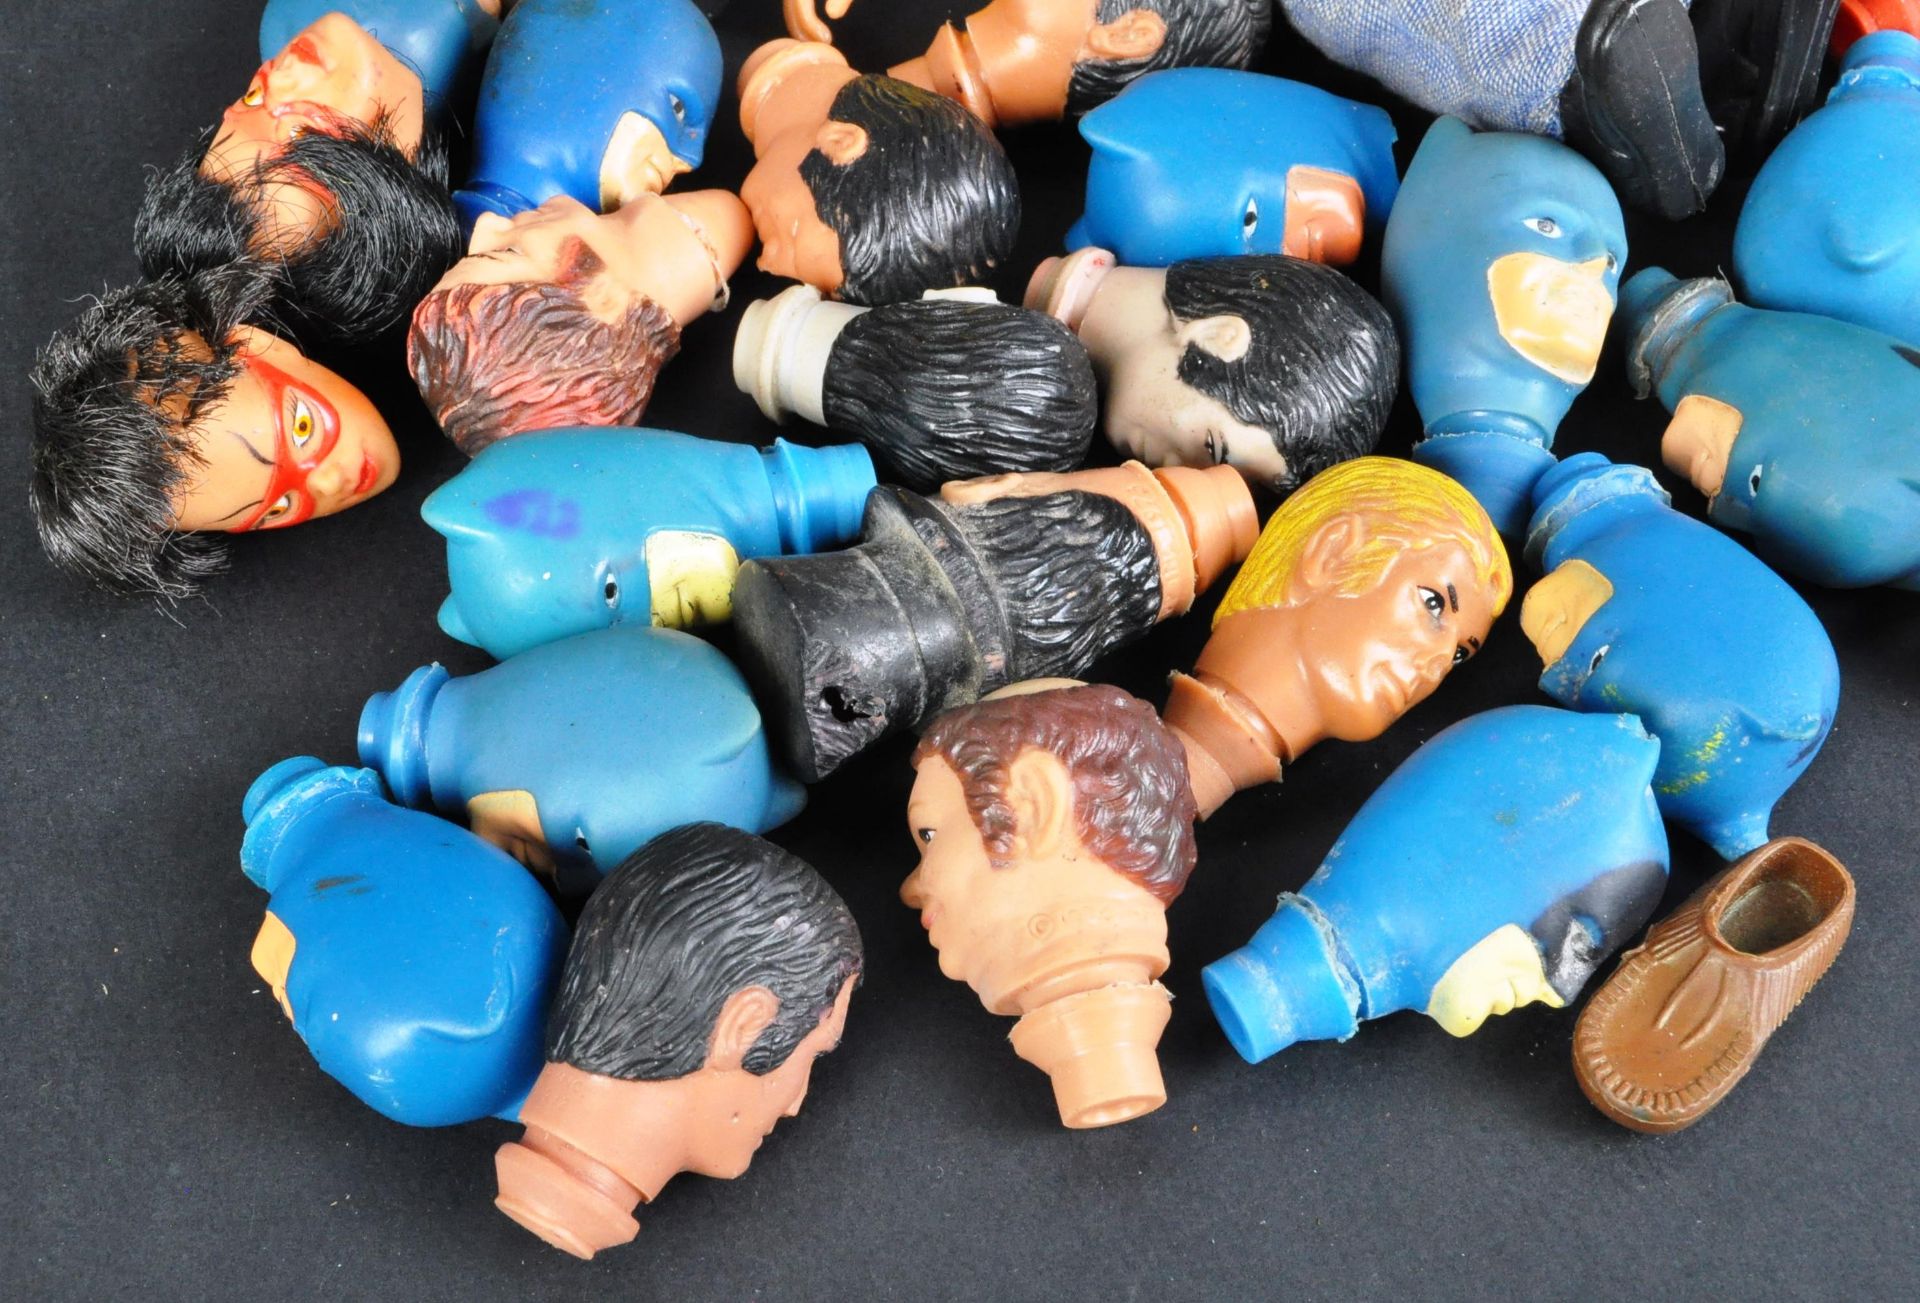 MEGO - LARGE COLLECTION OF VINTAGE 1960S / 70S ACTION FIGURE HEADS - Image 2 of 4